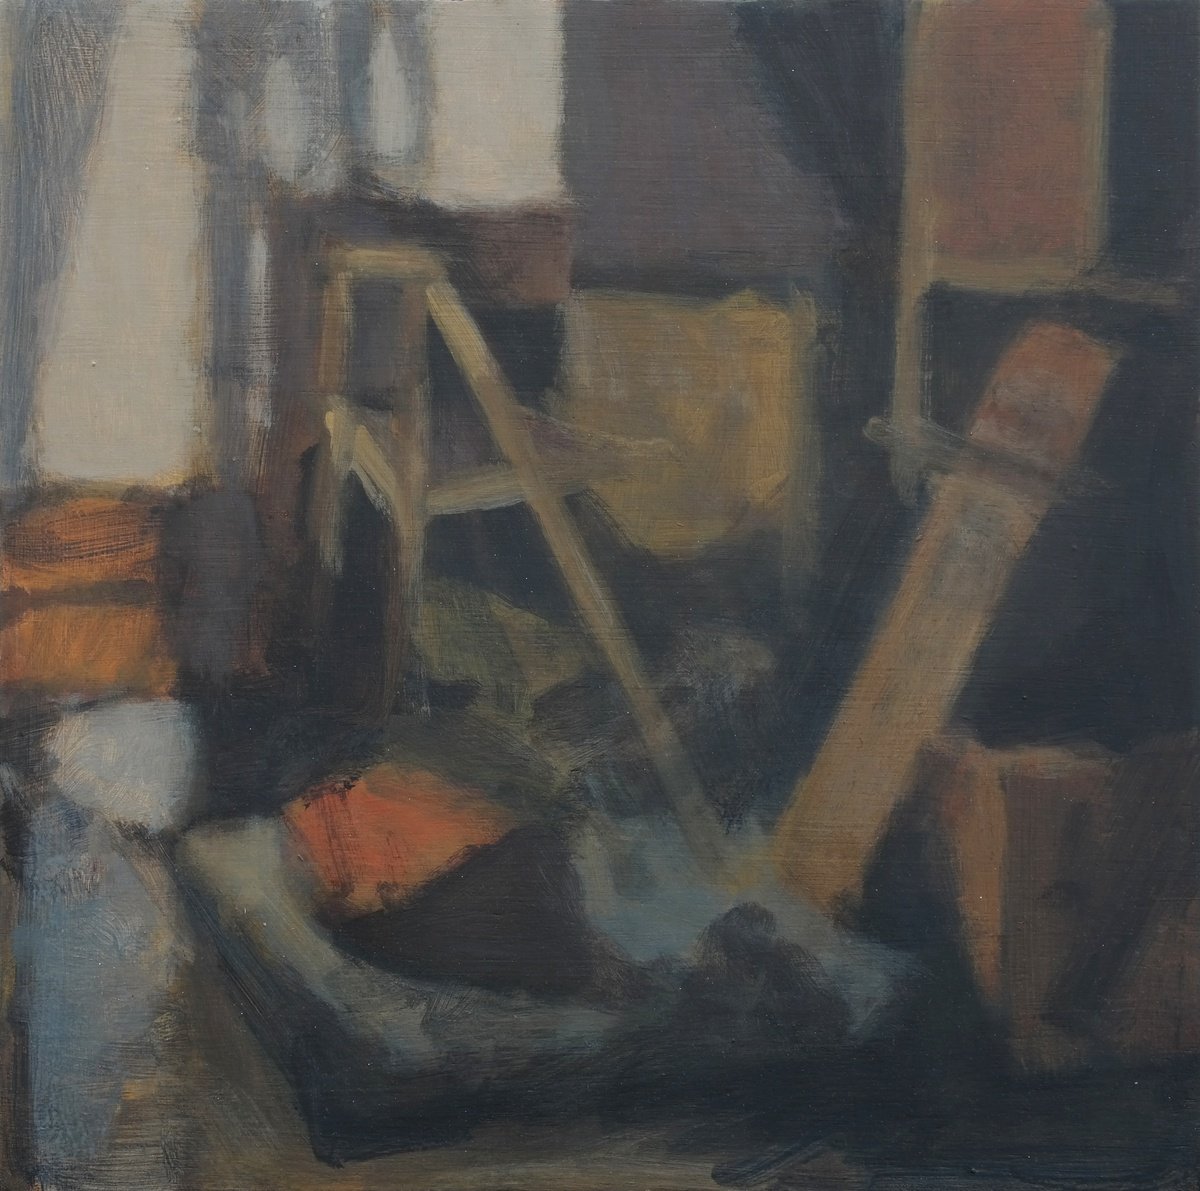 Sitting Room with chair by Hugo Lines